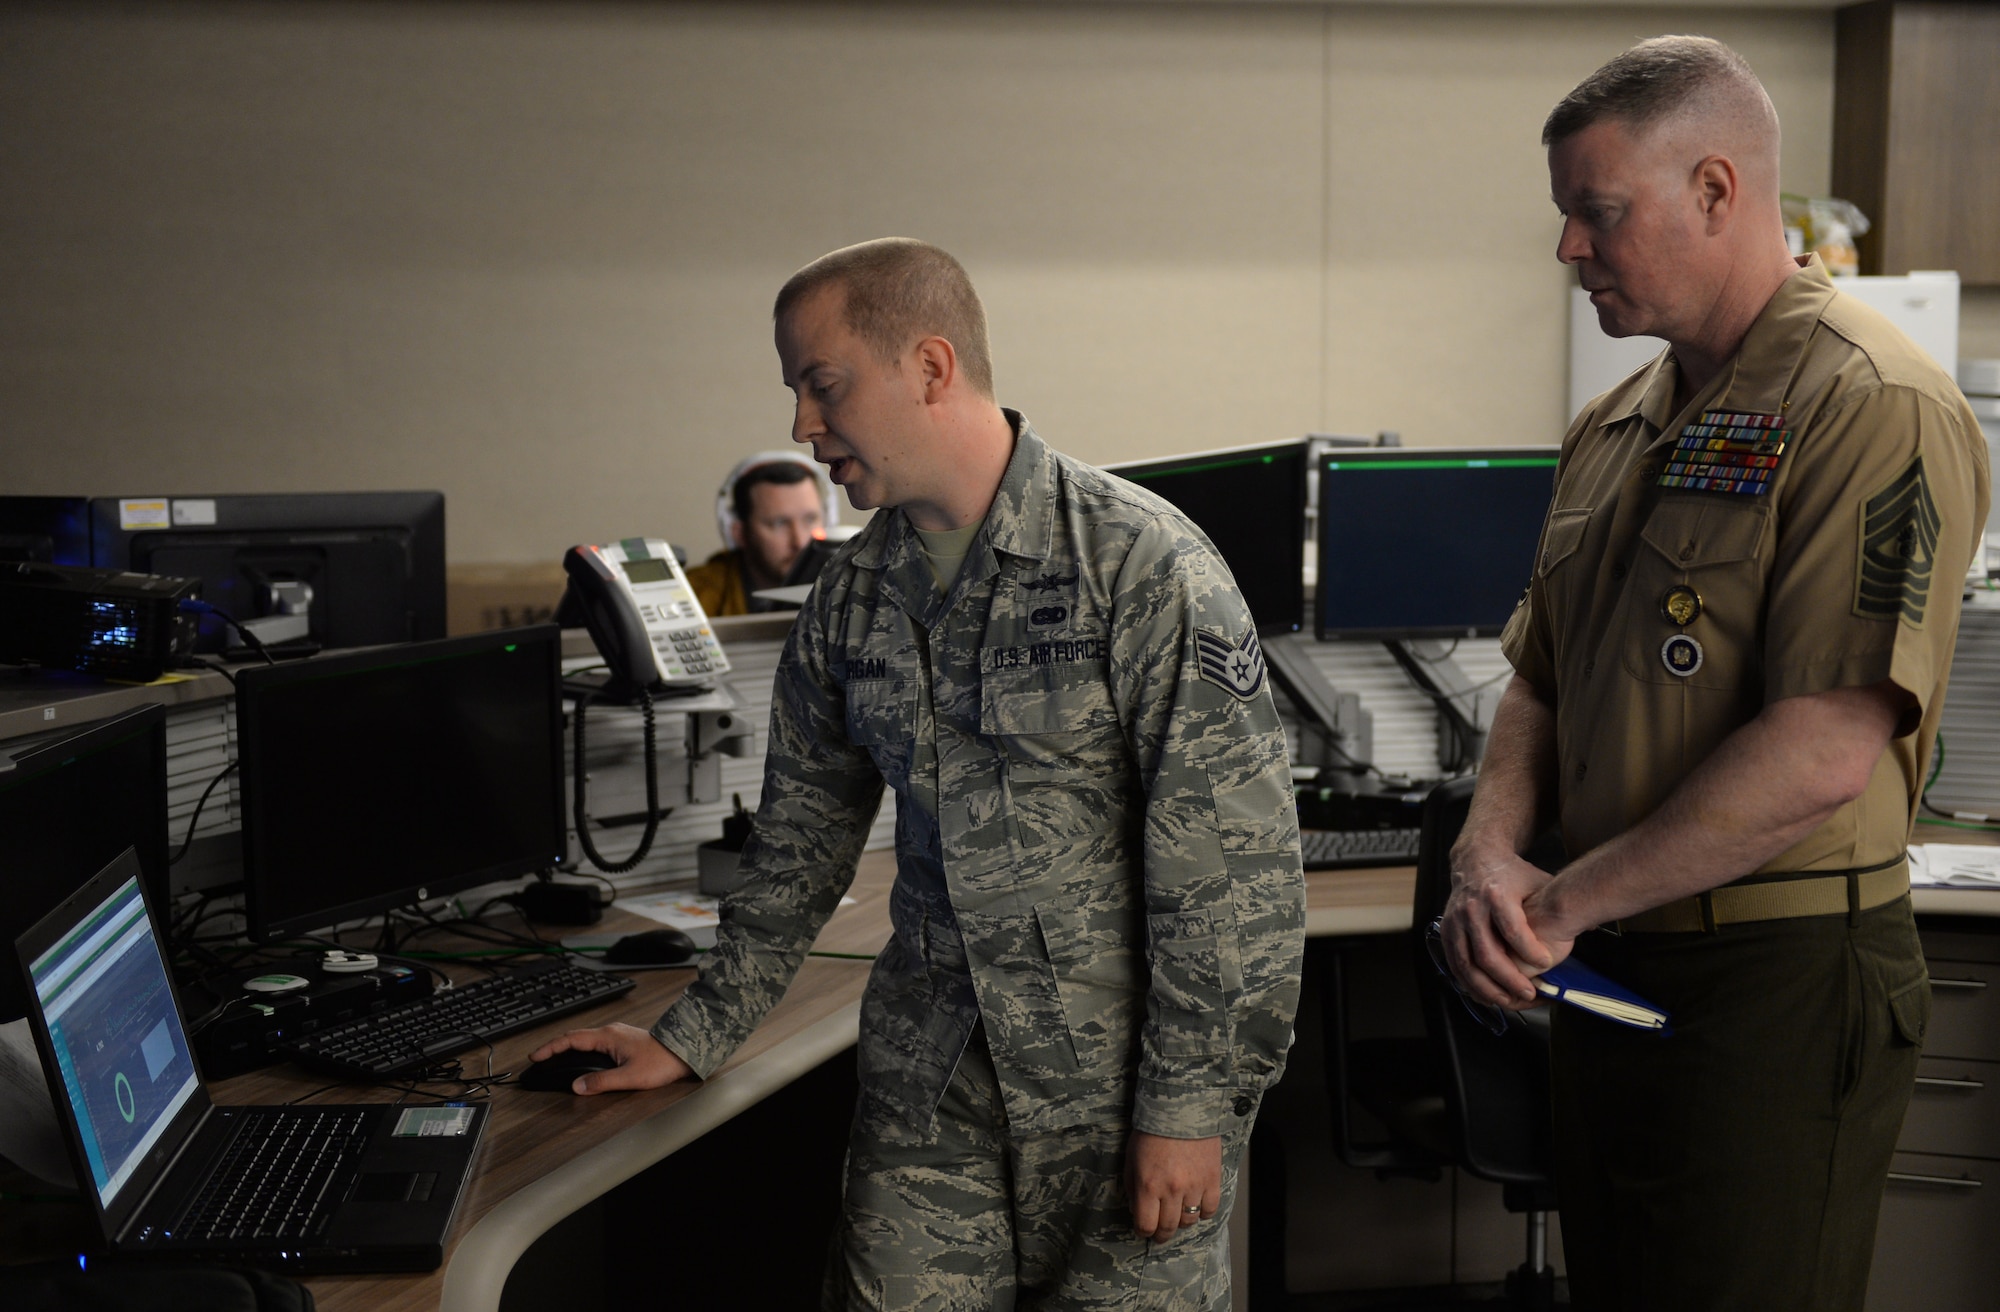 Staff Sgt. Seth Morgan, 834th Cyberspace Operations Squadron cyber warfare operator, highlights various cyber tools for Master Gunnery Sgt. Scott Stalker, U.S. Cyber Command and National Security Agency command senior enlisted leader, at Joint Base San Antonio-Lackland, Texas, March 21, 2019. During his visit, Stalker met with cyber Airmen to learn more about their unit’s missions. (U.S. Air Force photo by Tech. Sgt. R.J. Biermann)